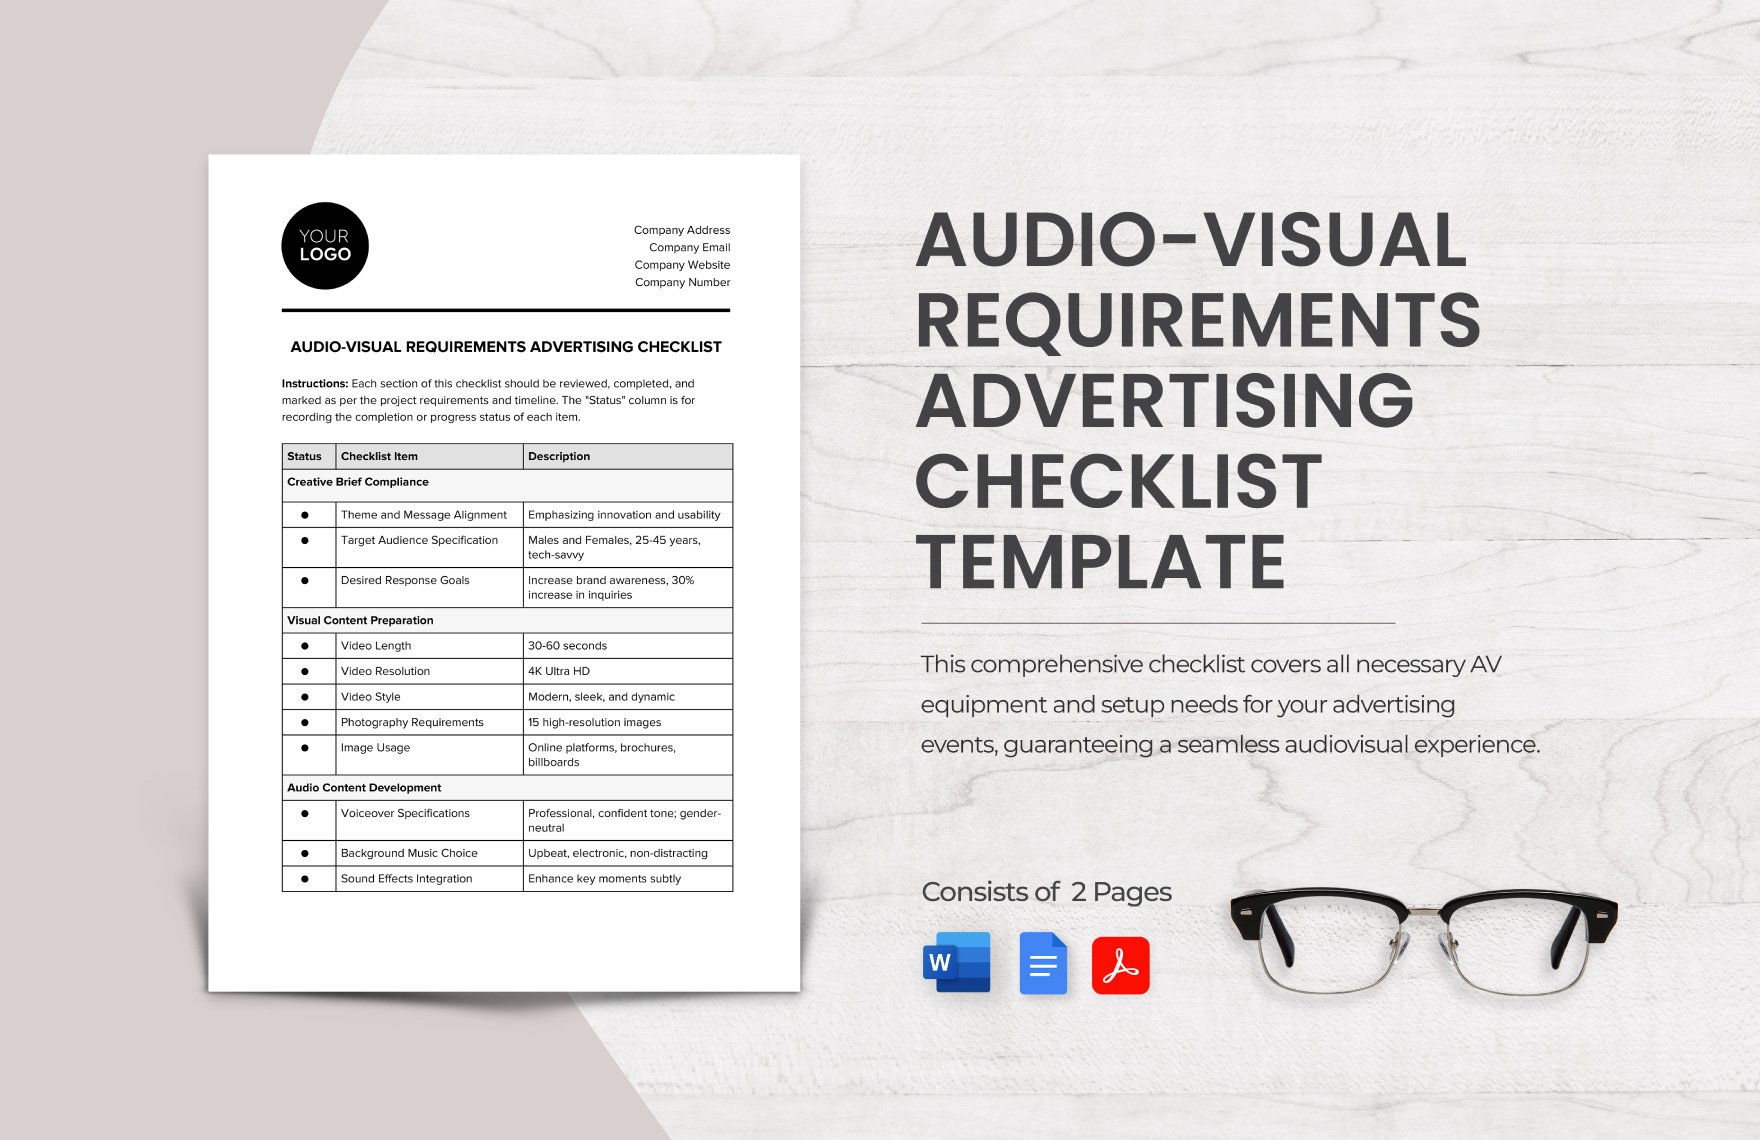 Free Audio-Visual Requirements Advertising Checklist Template in Word, Google Docs, PDF